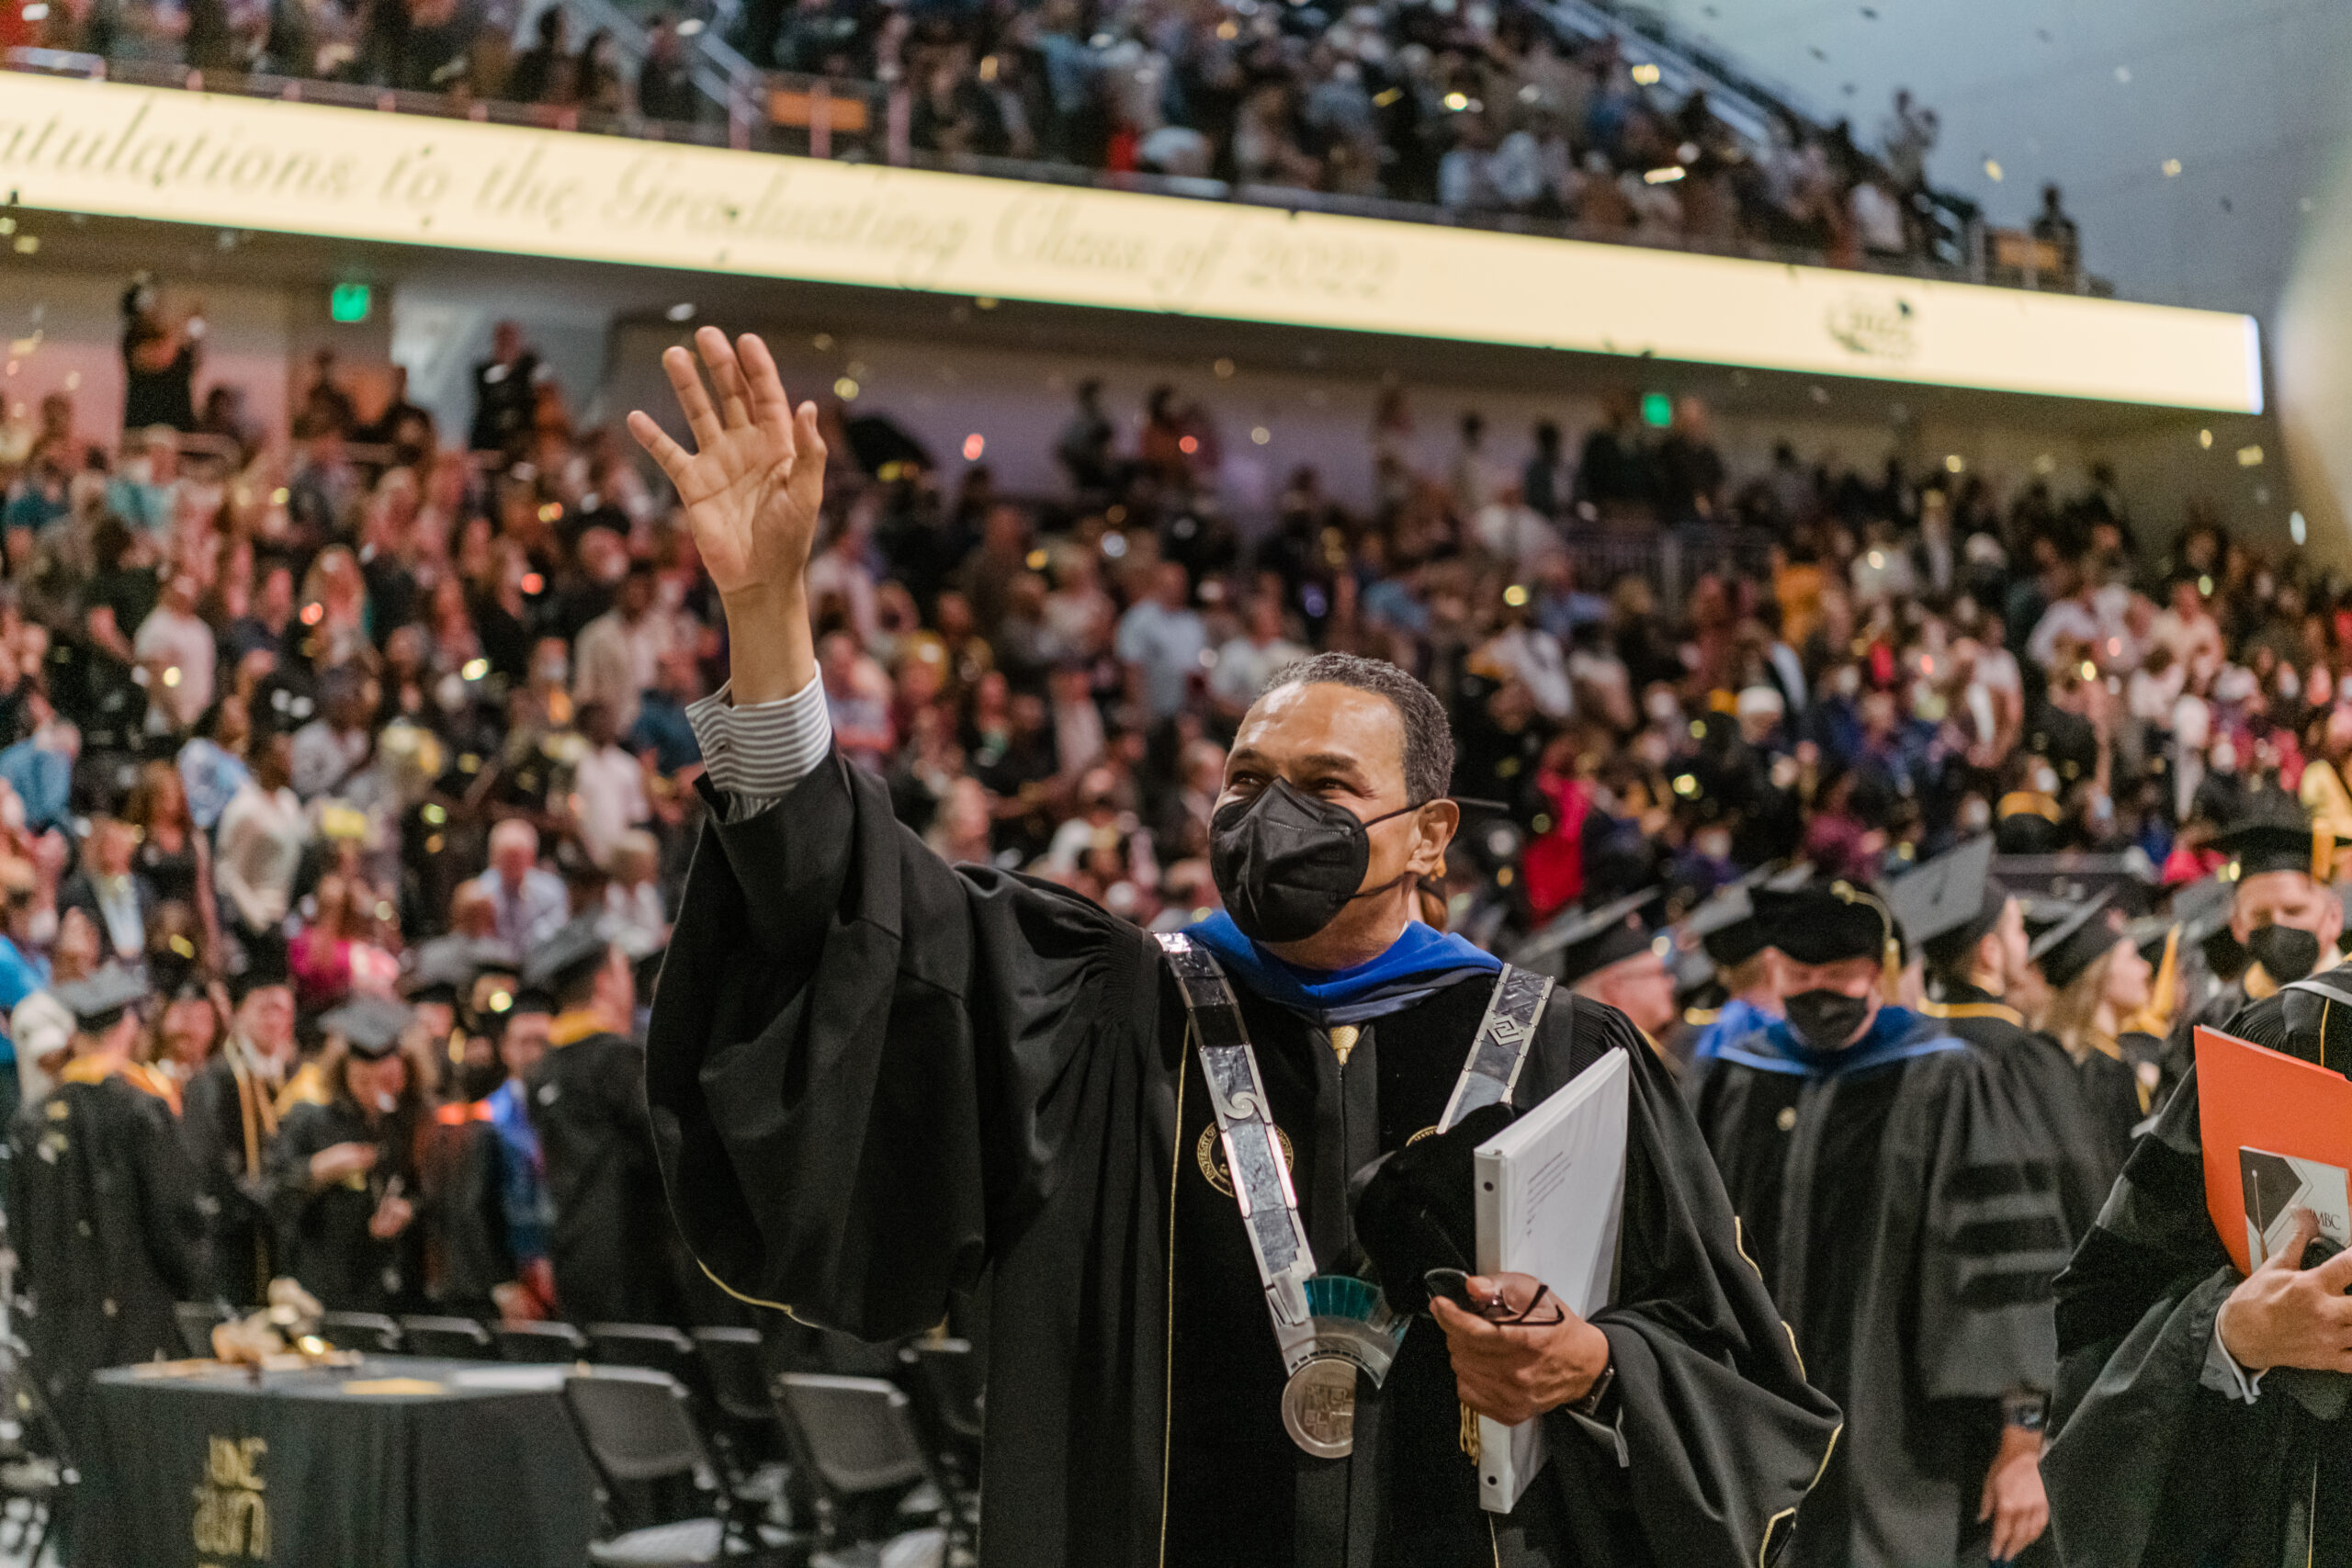 Man wearing face mask walking in commencement regalia waving at audience